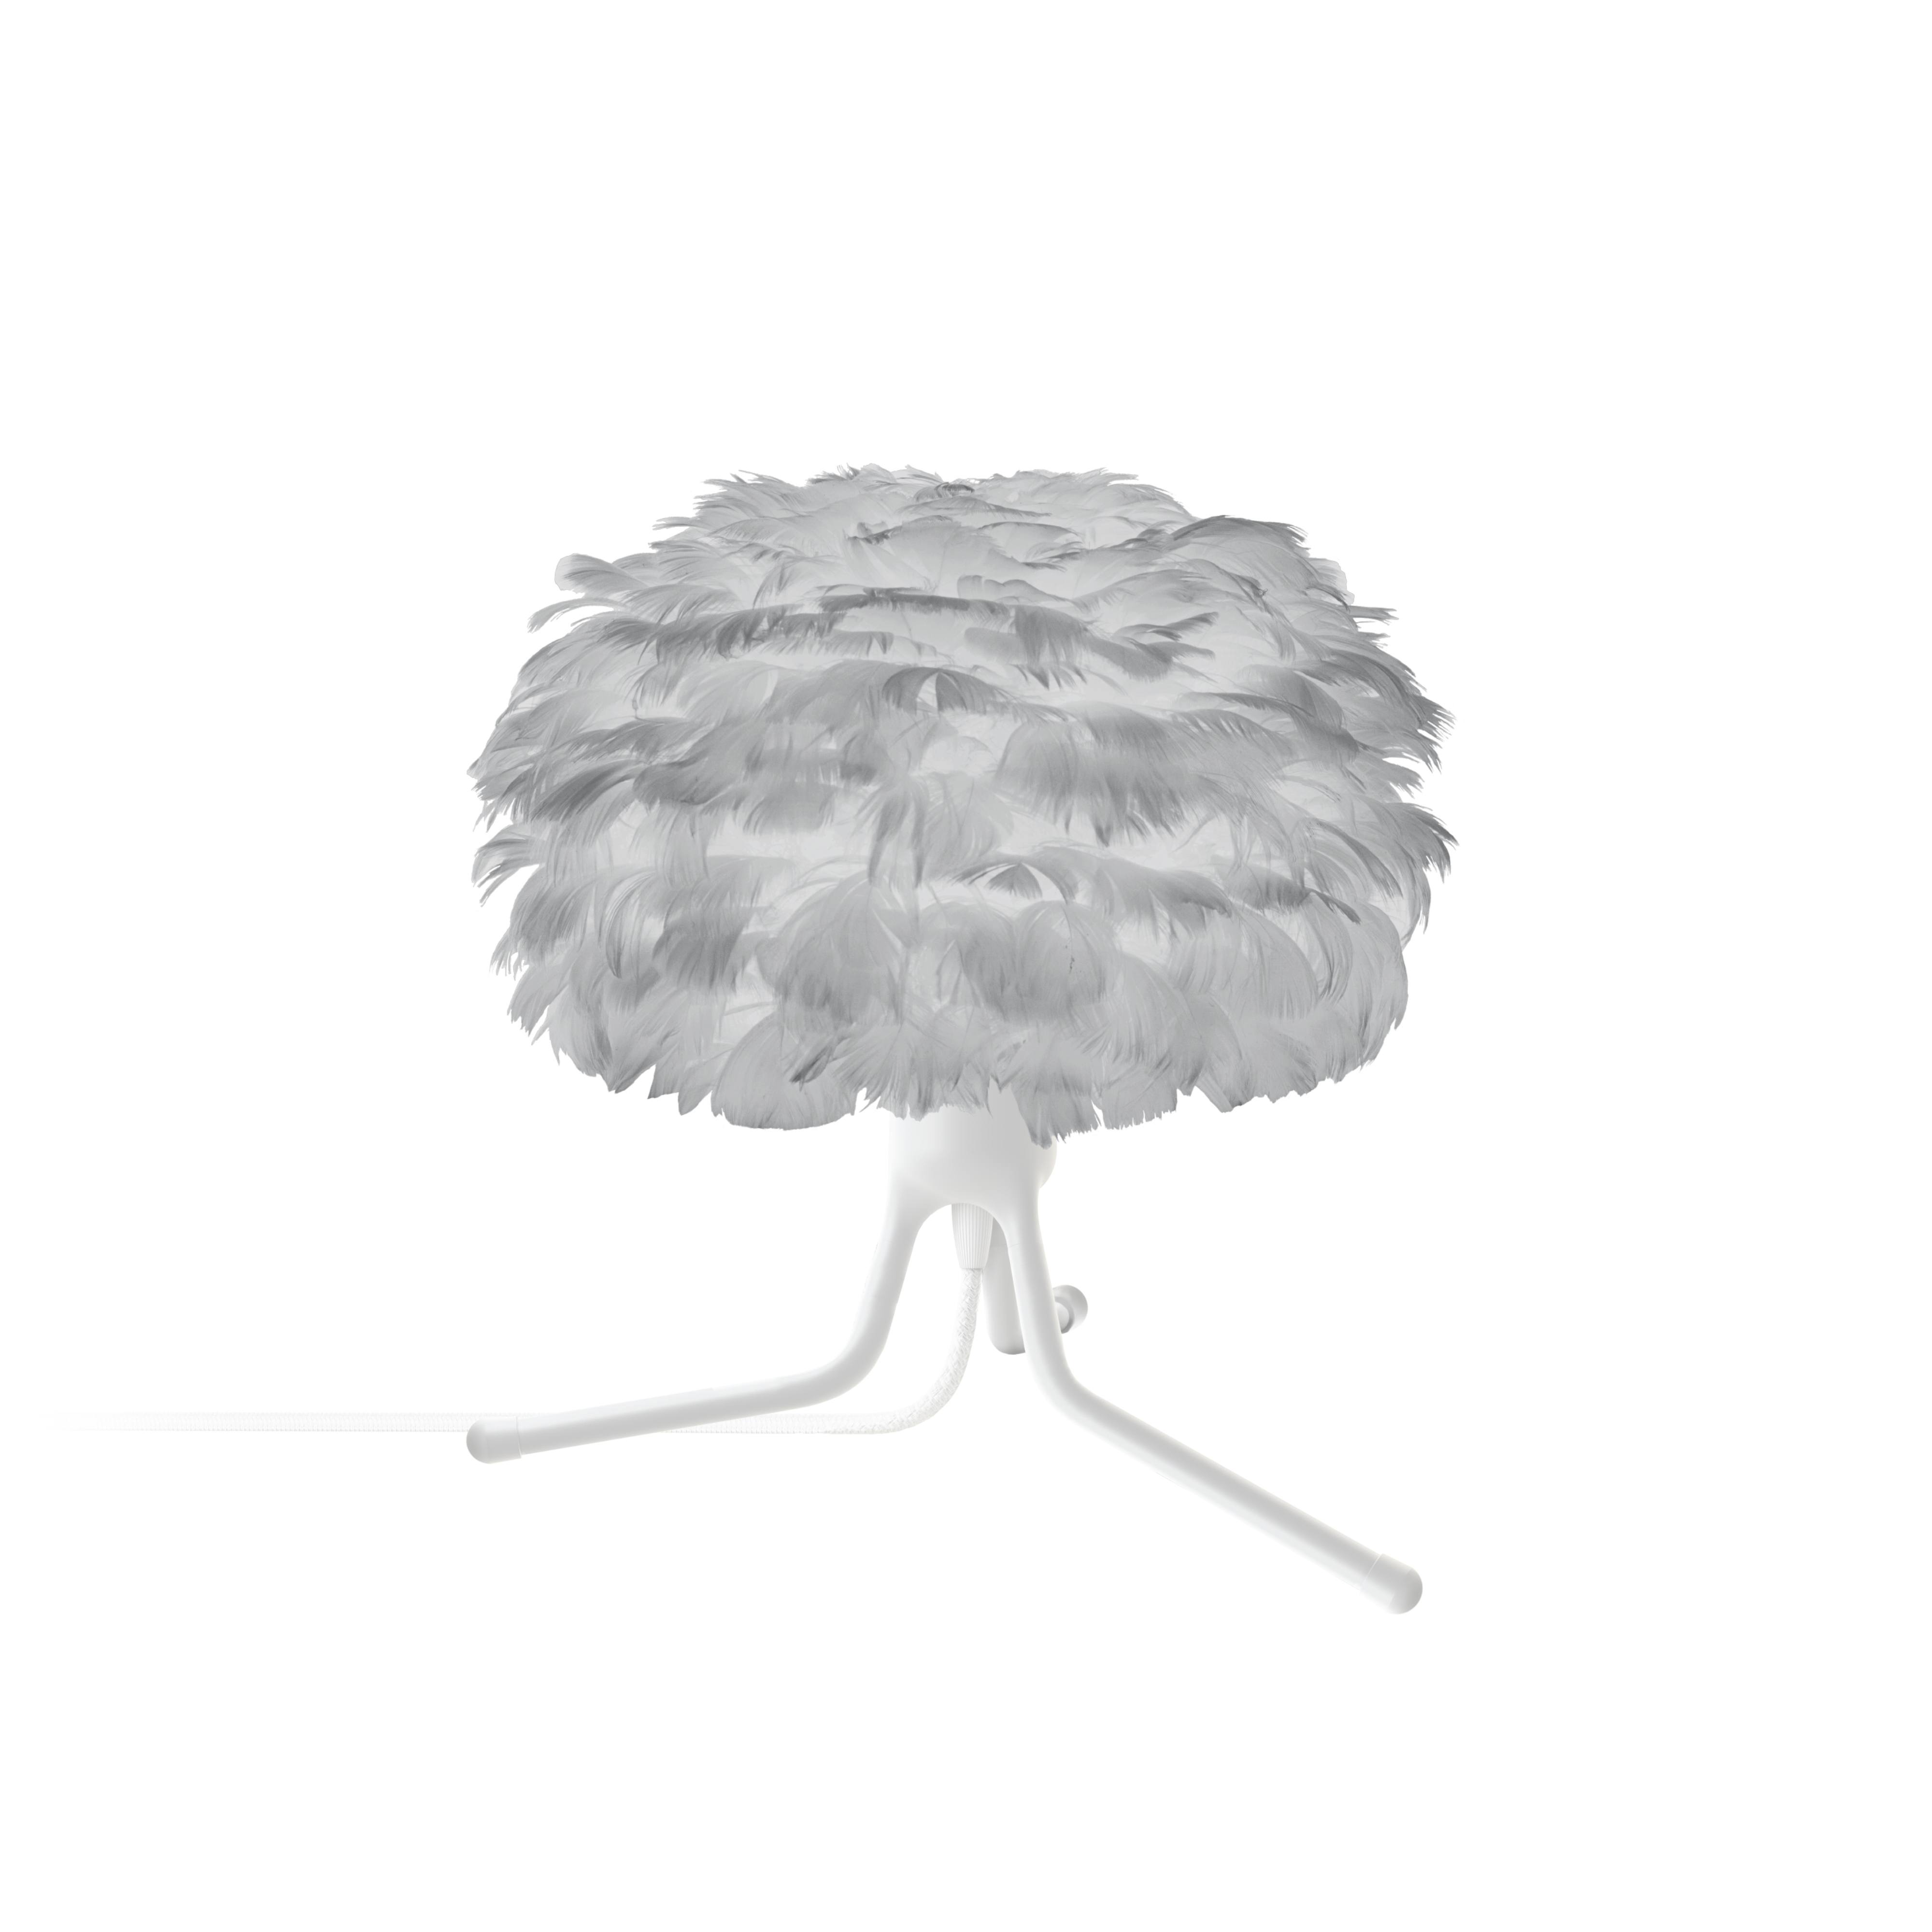 UMAGE Micro Light Grey Feather Eos Table Lamp with White Base Tripod